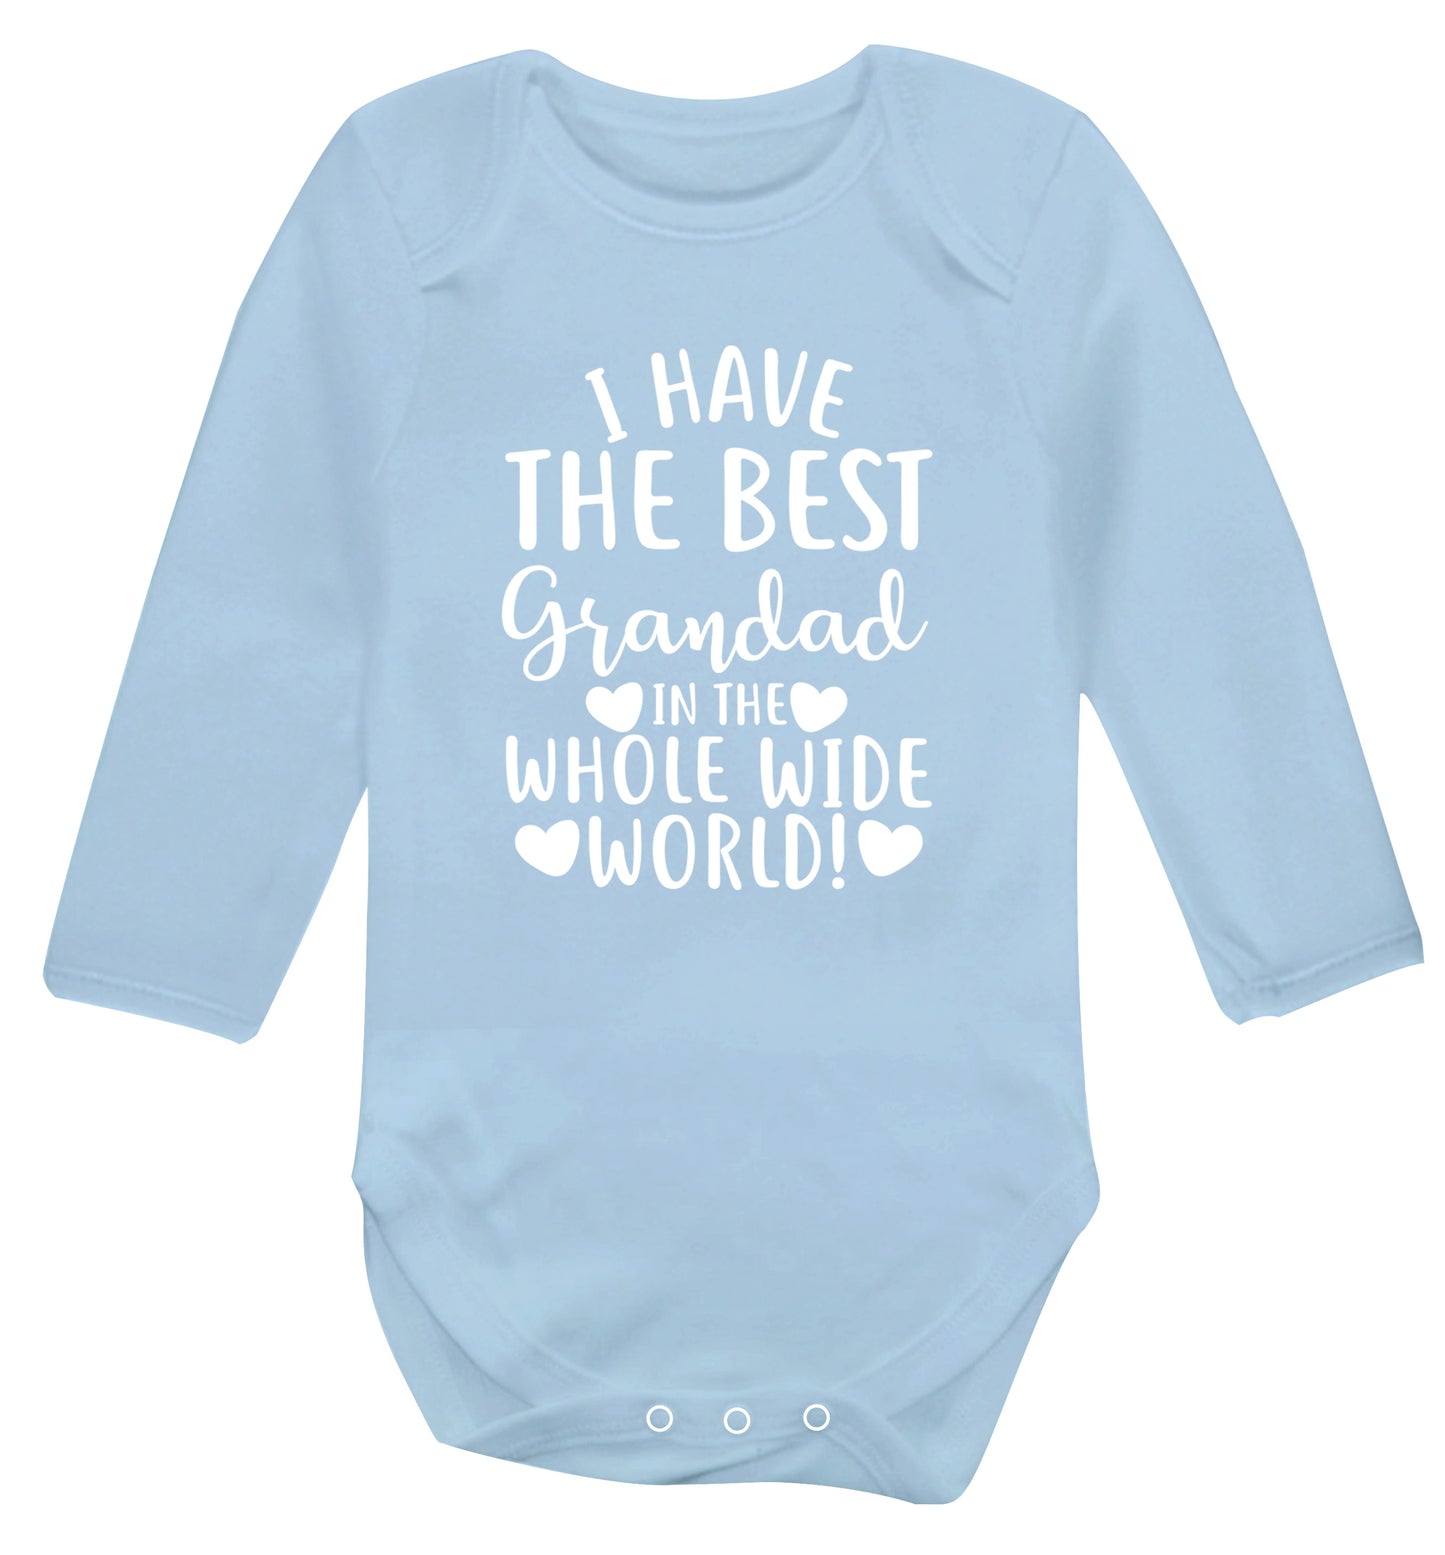 I have the best grandad in the whole wide world! Baby Vest long sleeved pale blue 6-12 months